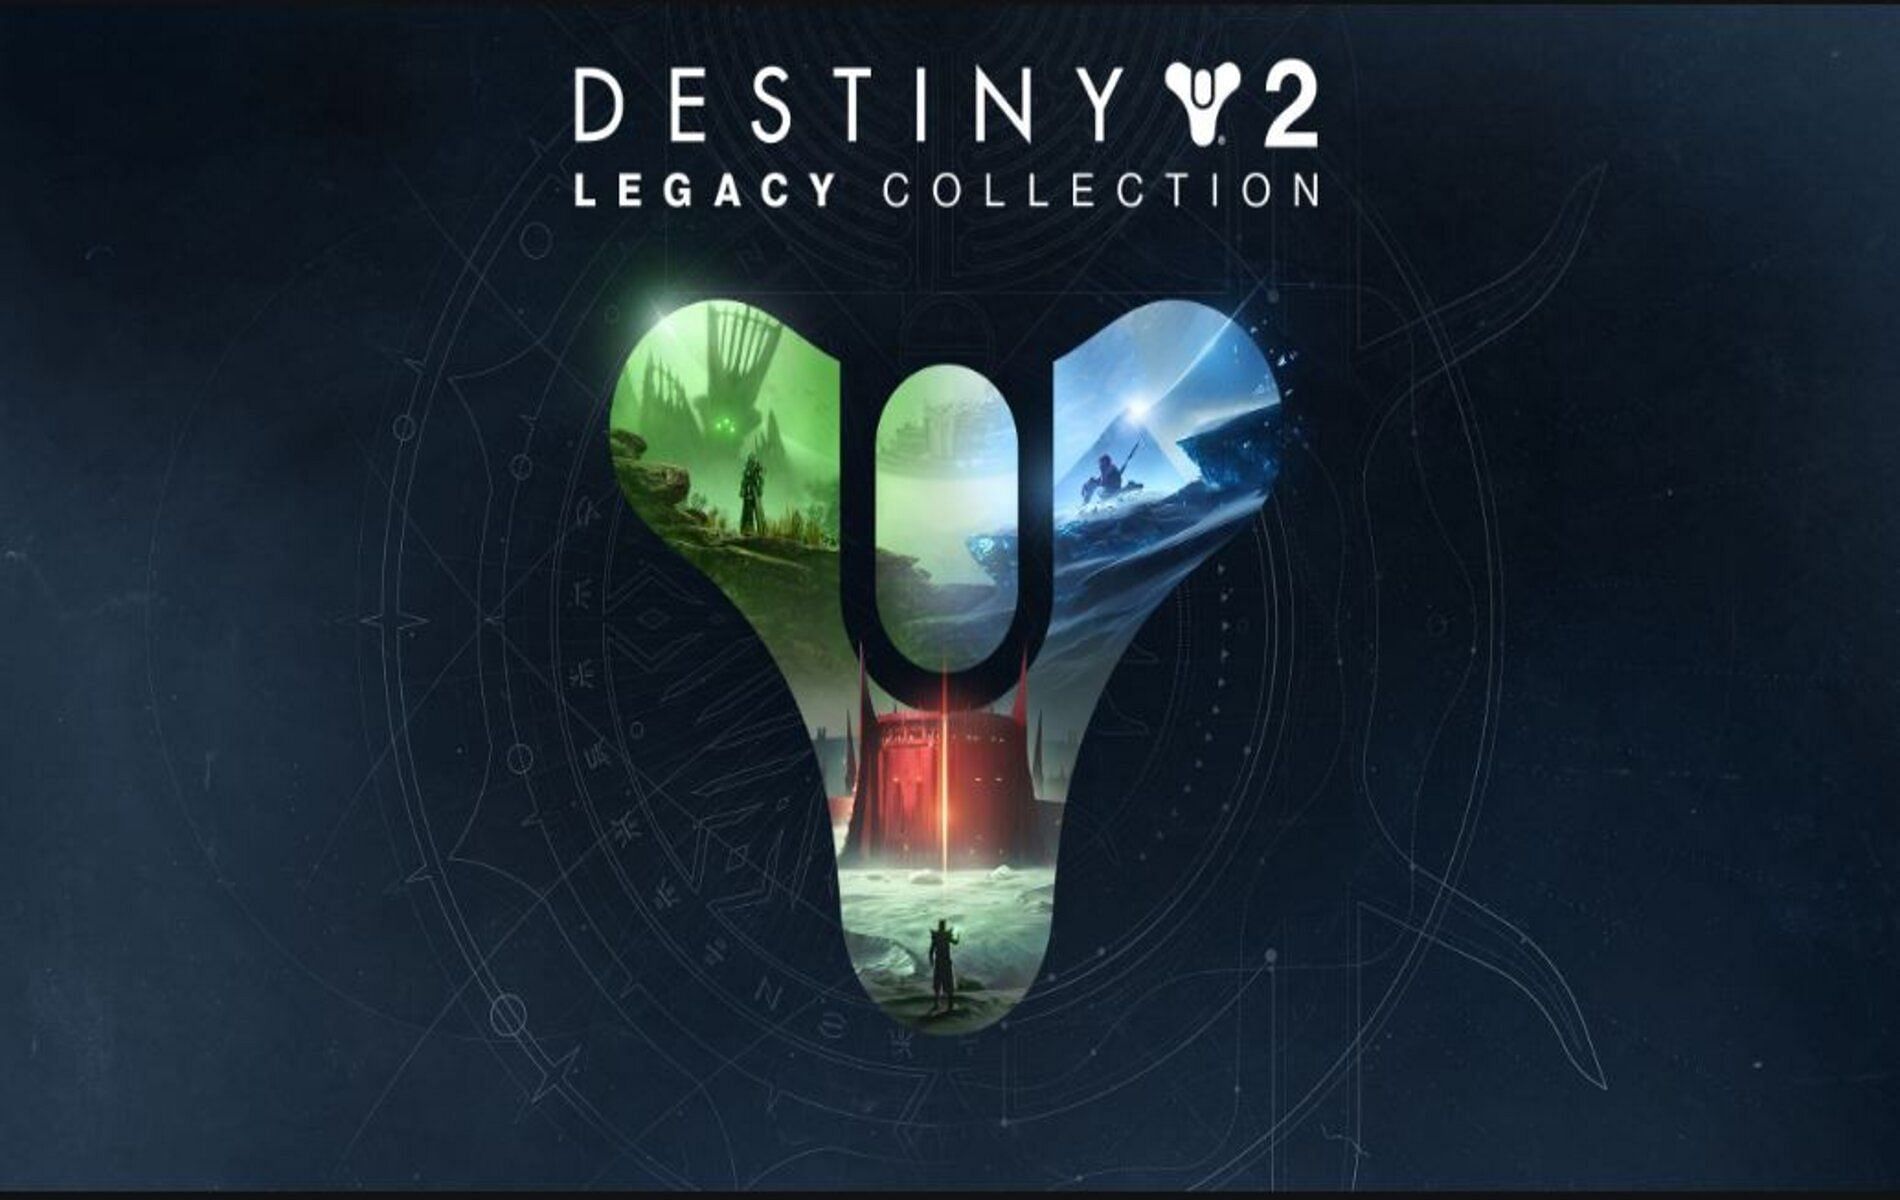 Destiny Legacy collection  cover art